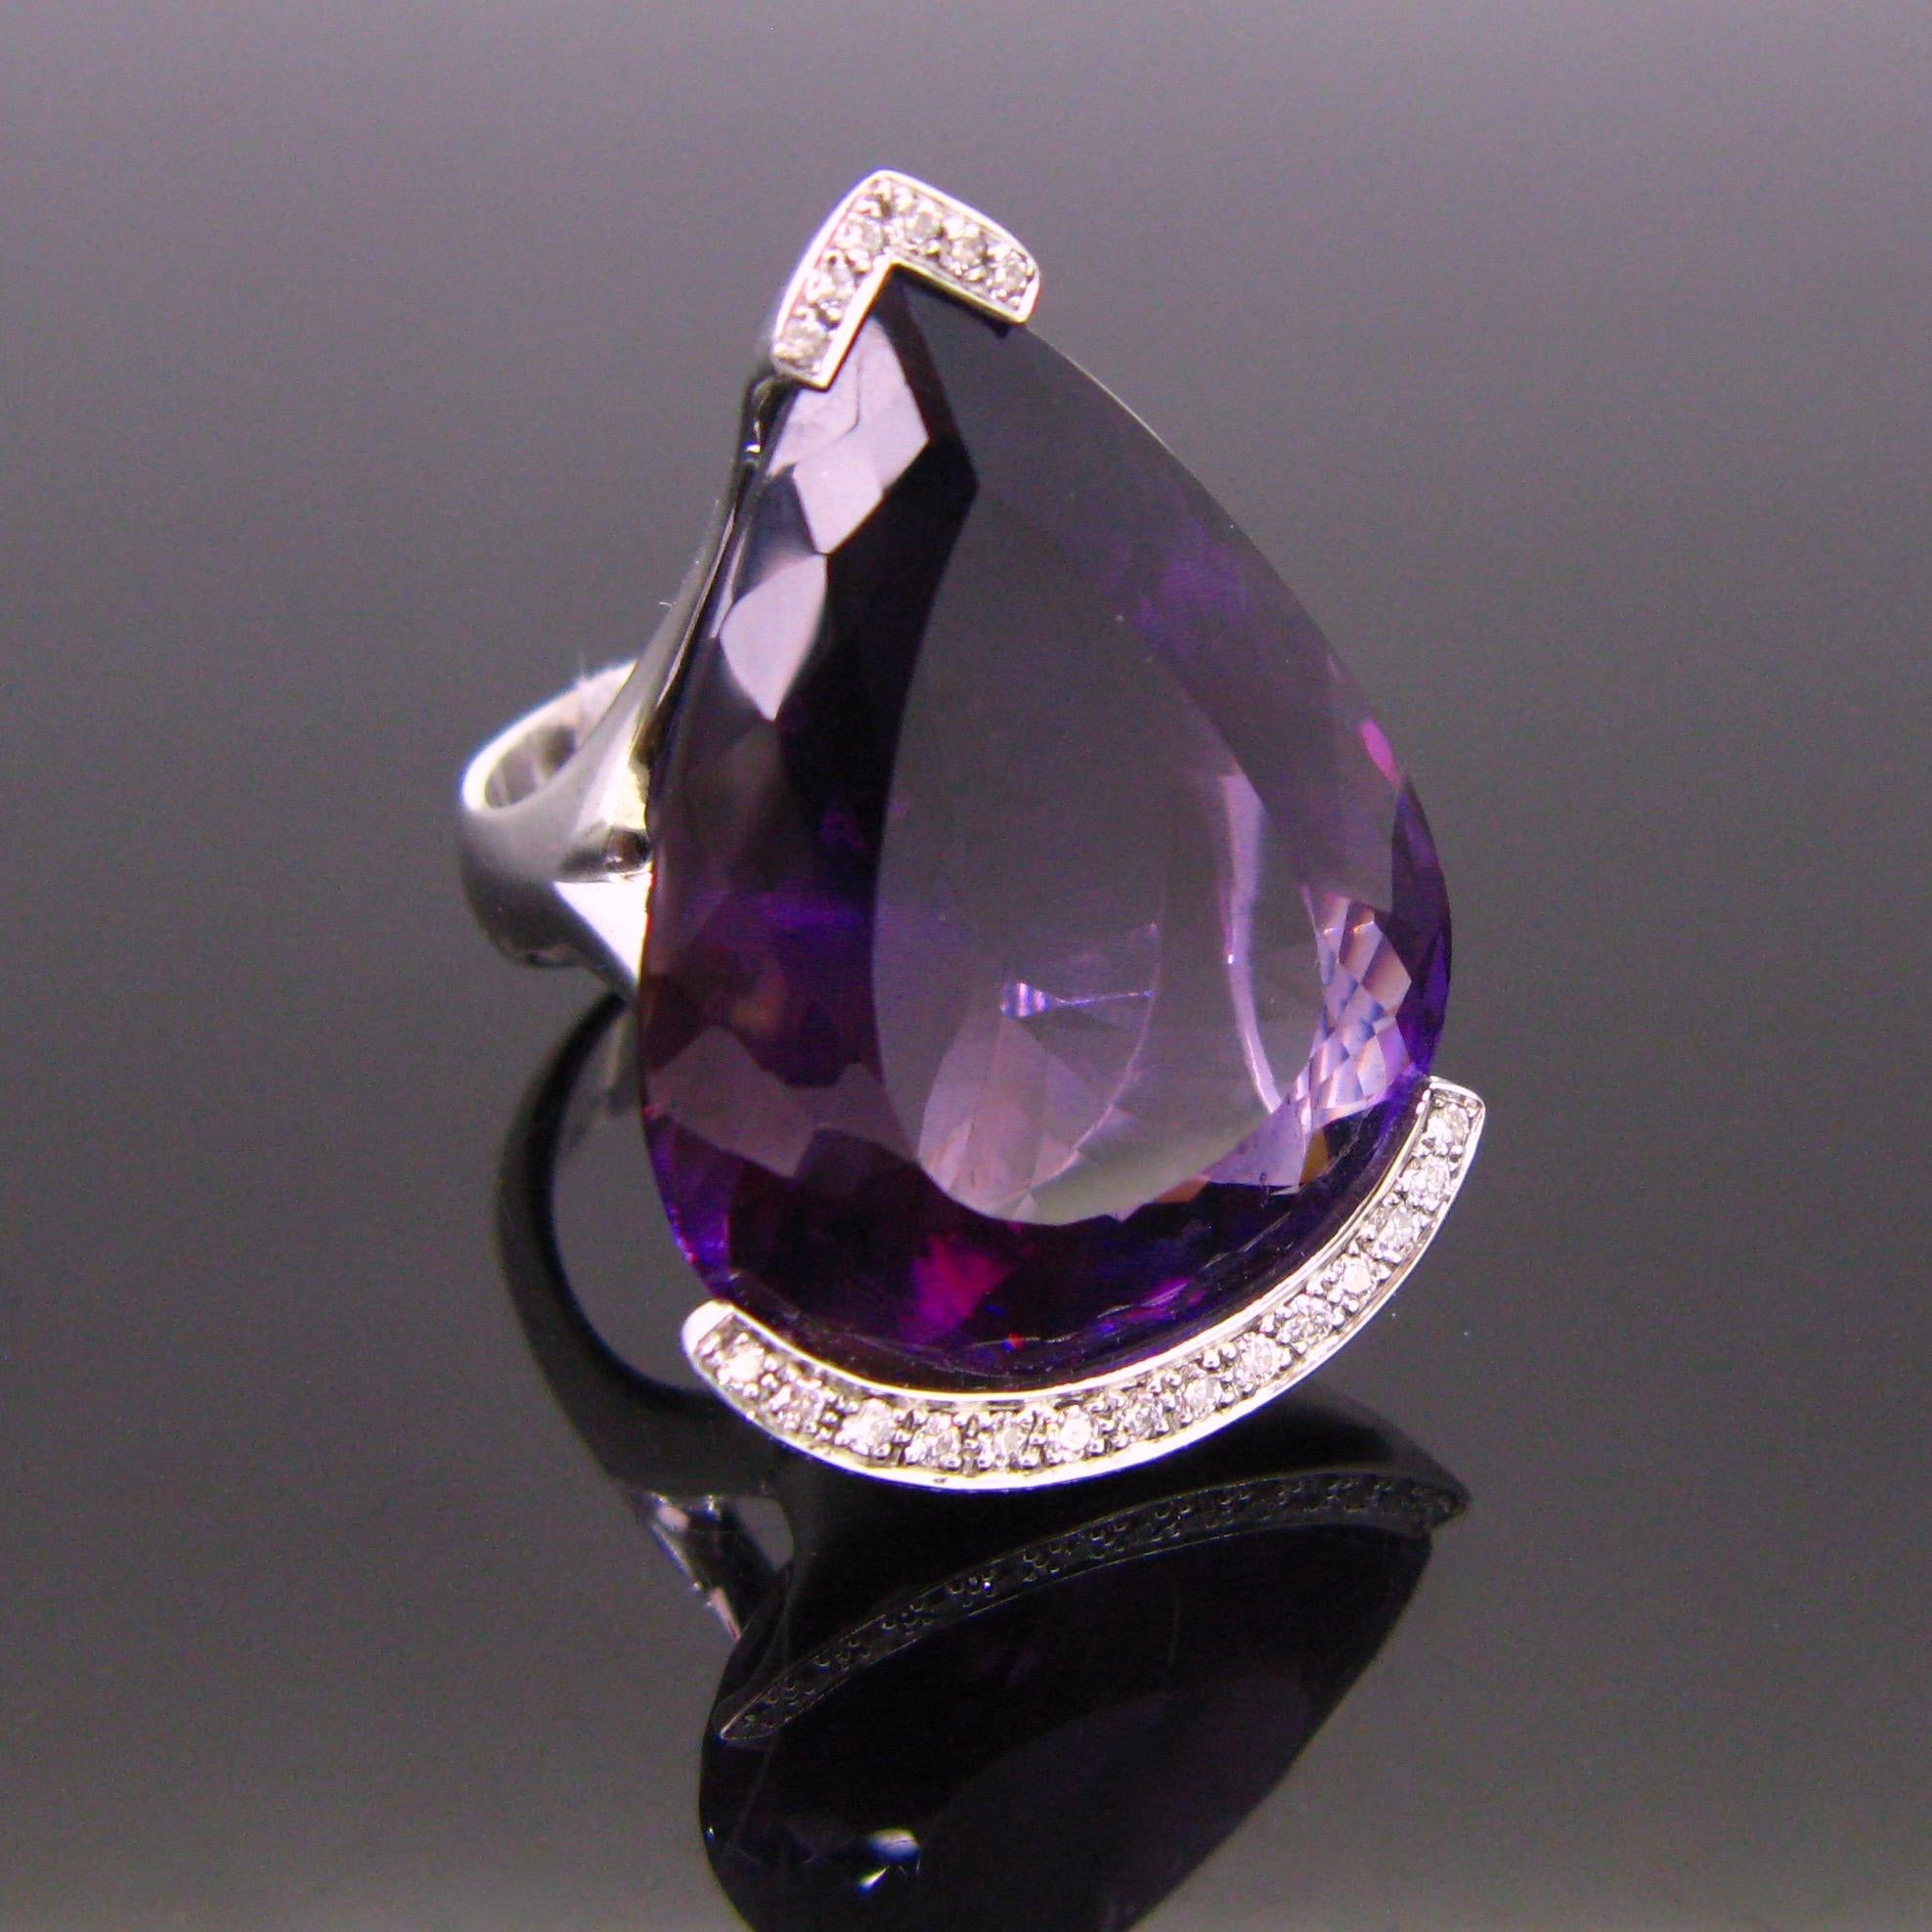 This important ring is adorned with a stunning amethyst, pear shape with a beautiful deep purple color. The 18kt white gold ring was designed by the French jeweler Philippe Comoy. The amethyst weighs approximately 60ct (measurements : 32.71mm x